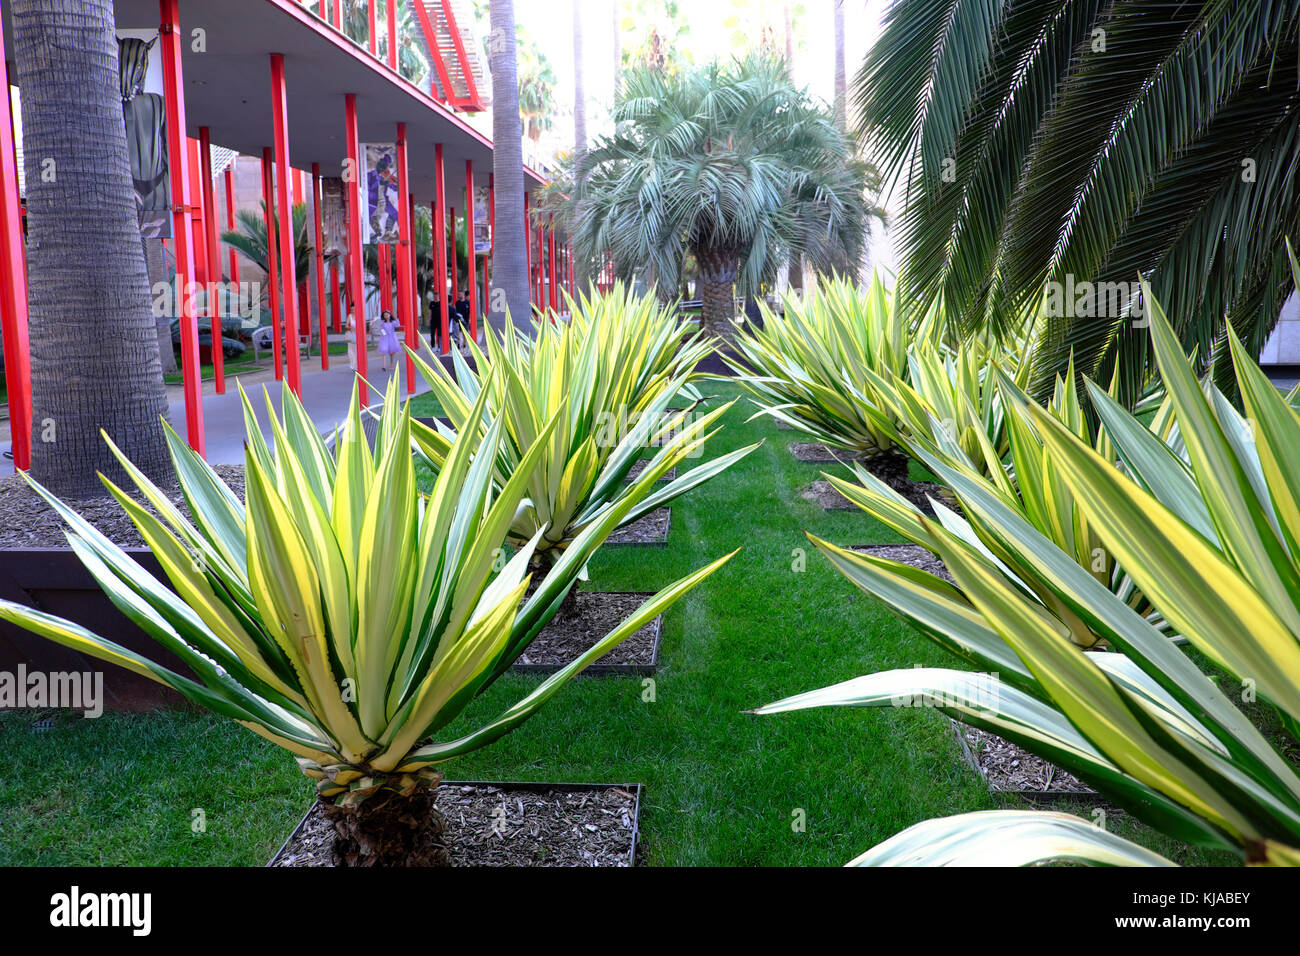 Yucca plants at LACMA palm garden next to walkway to Broad Contemporary Art Museum, Wilshire Blvd Miracle Mile Los Angeles LA California  KATHY DEWITT Stock Photo